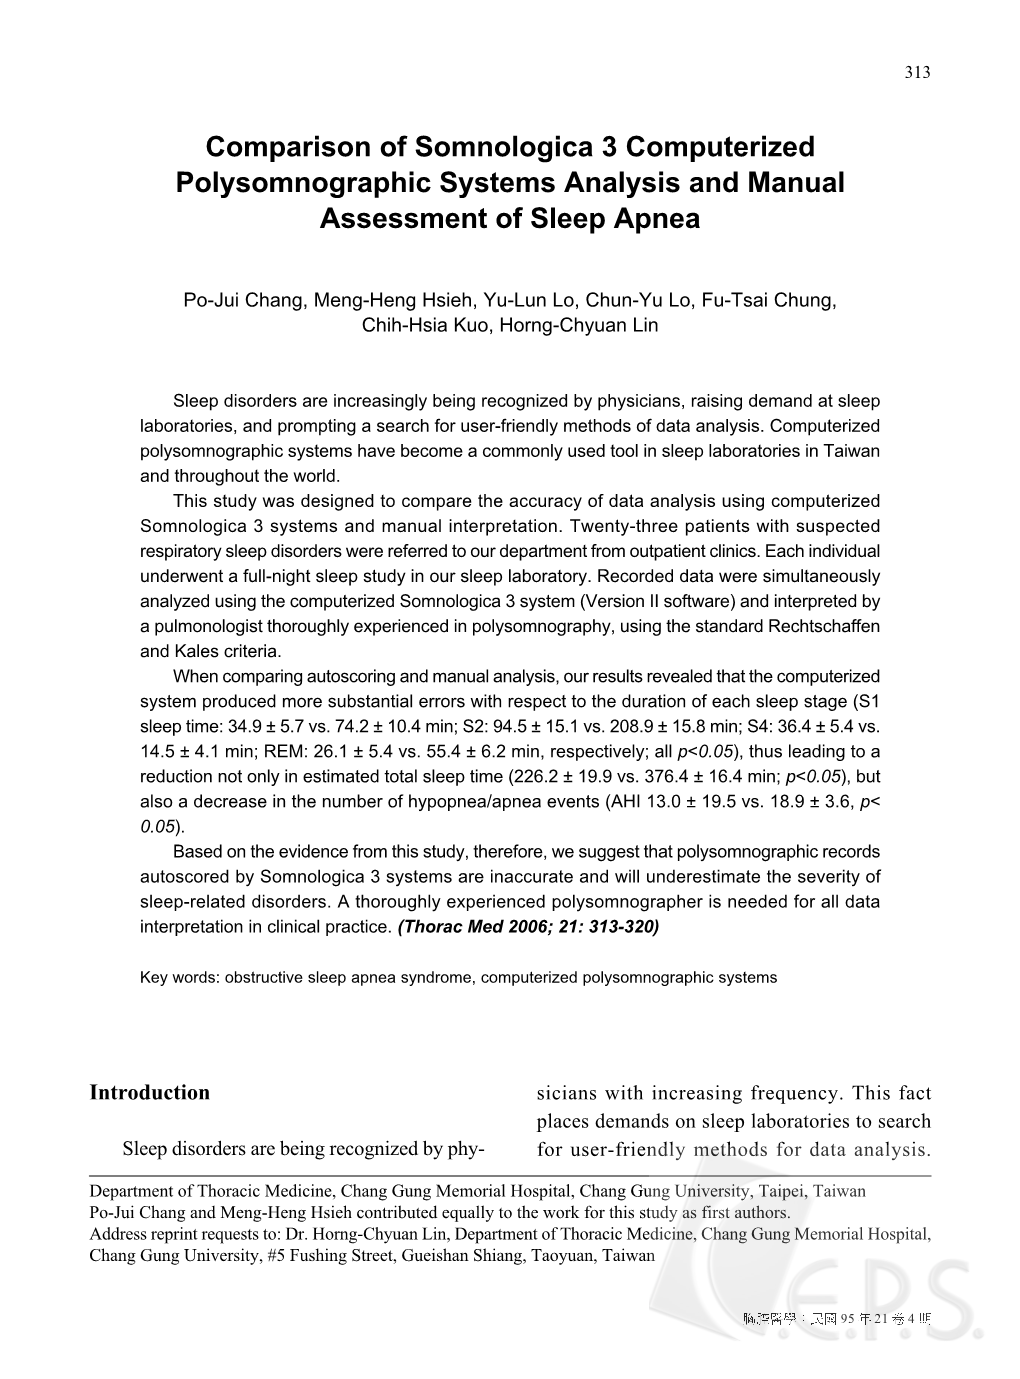 Comparison of Somnologica 3 Computerized Polysomnographic Systems Analysis and Manual Assessment of Sleep Apnea